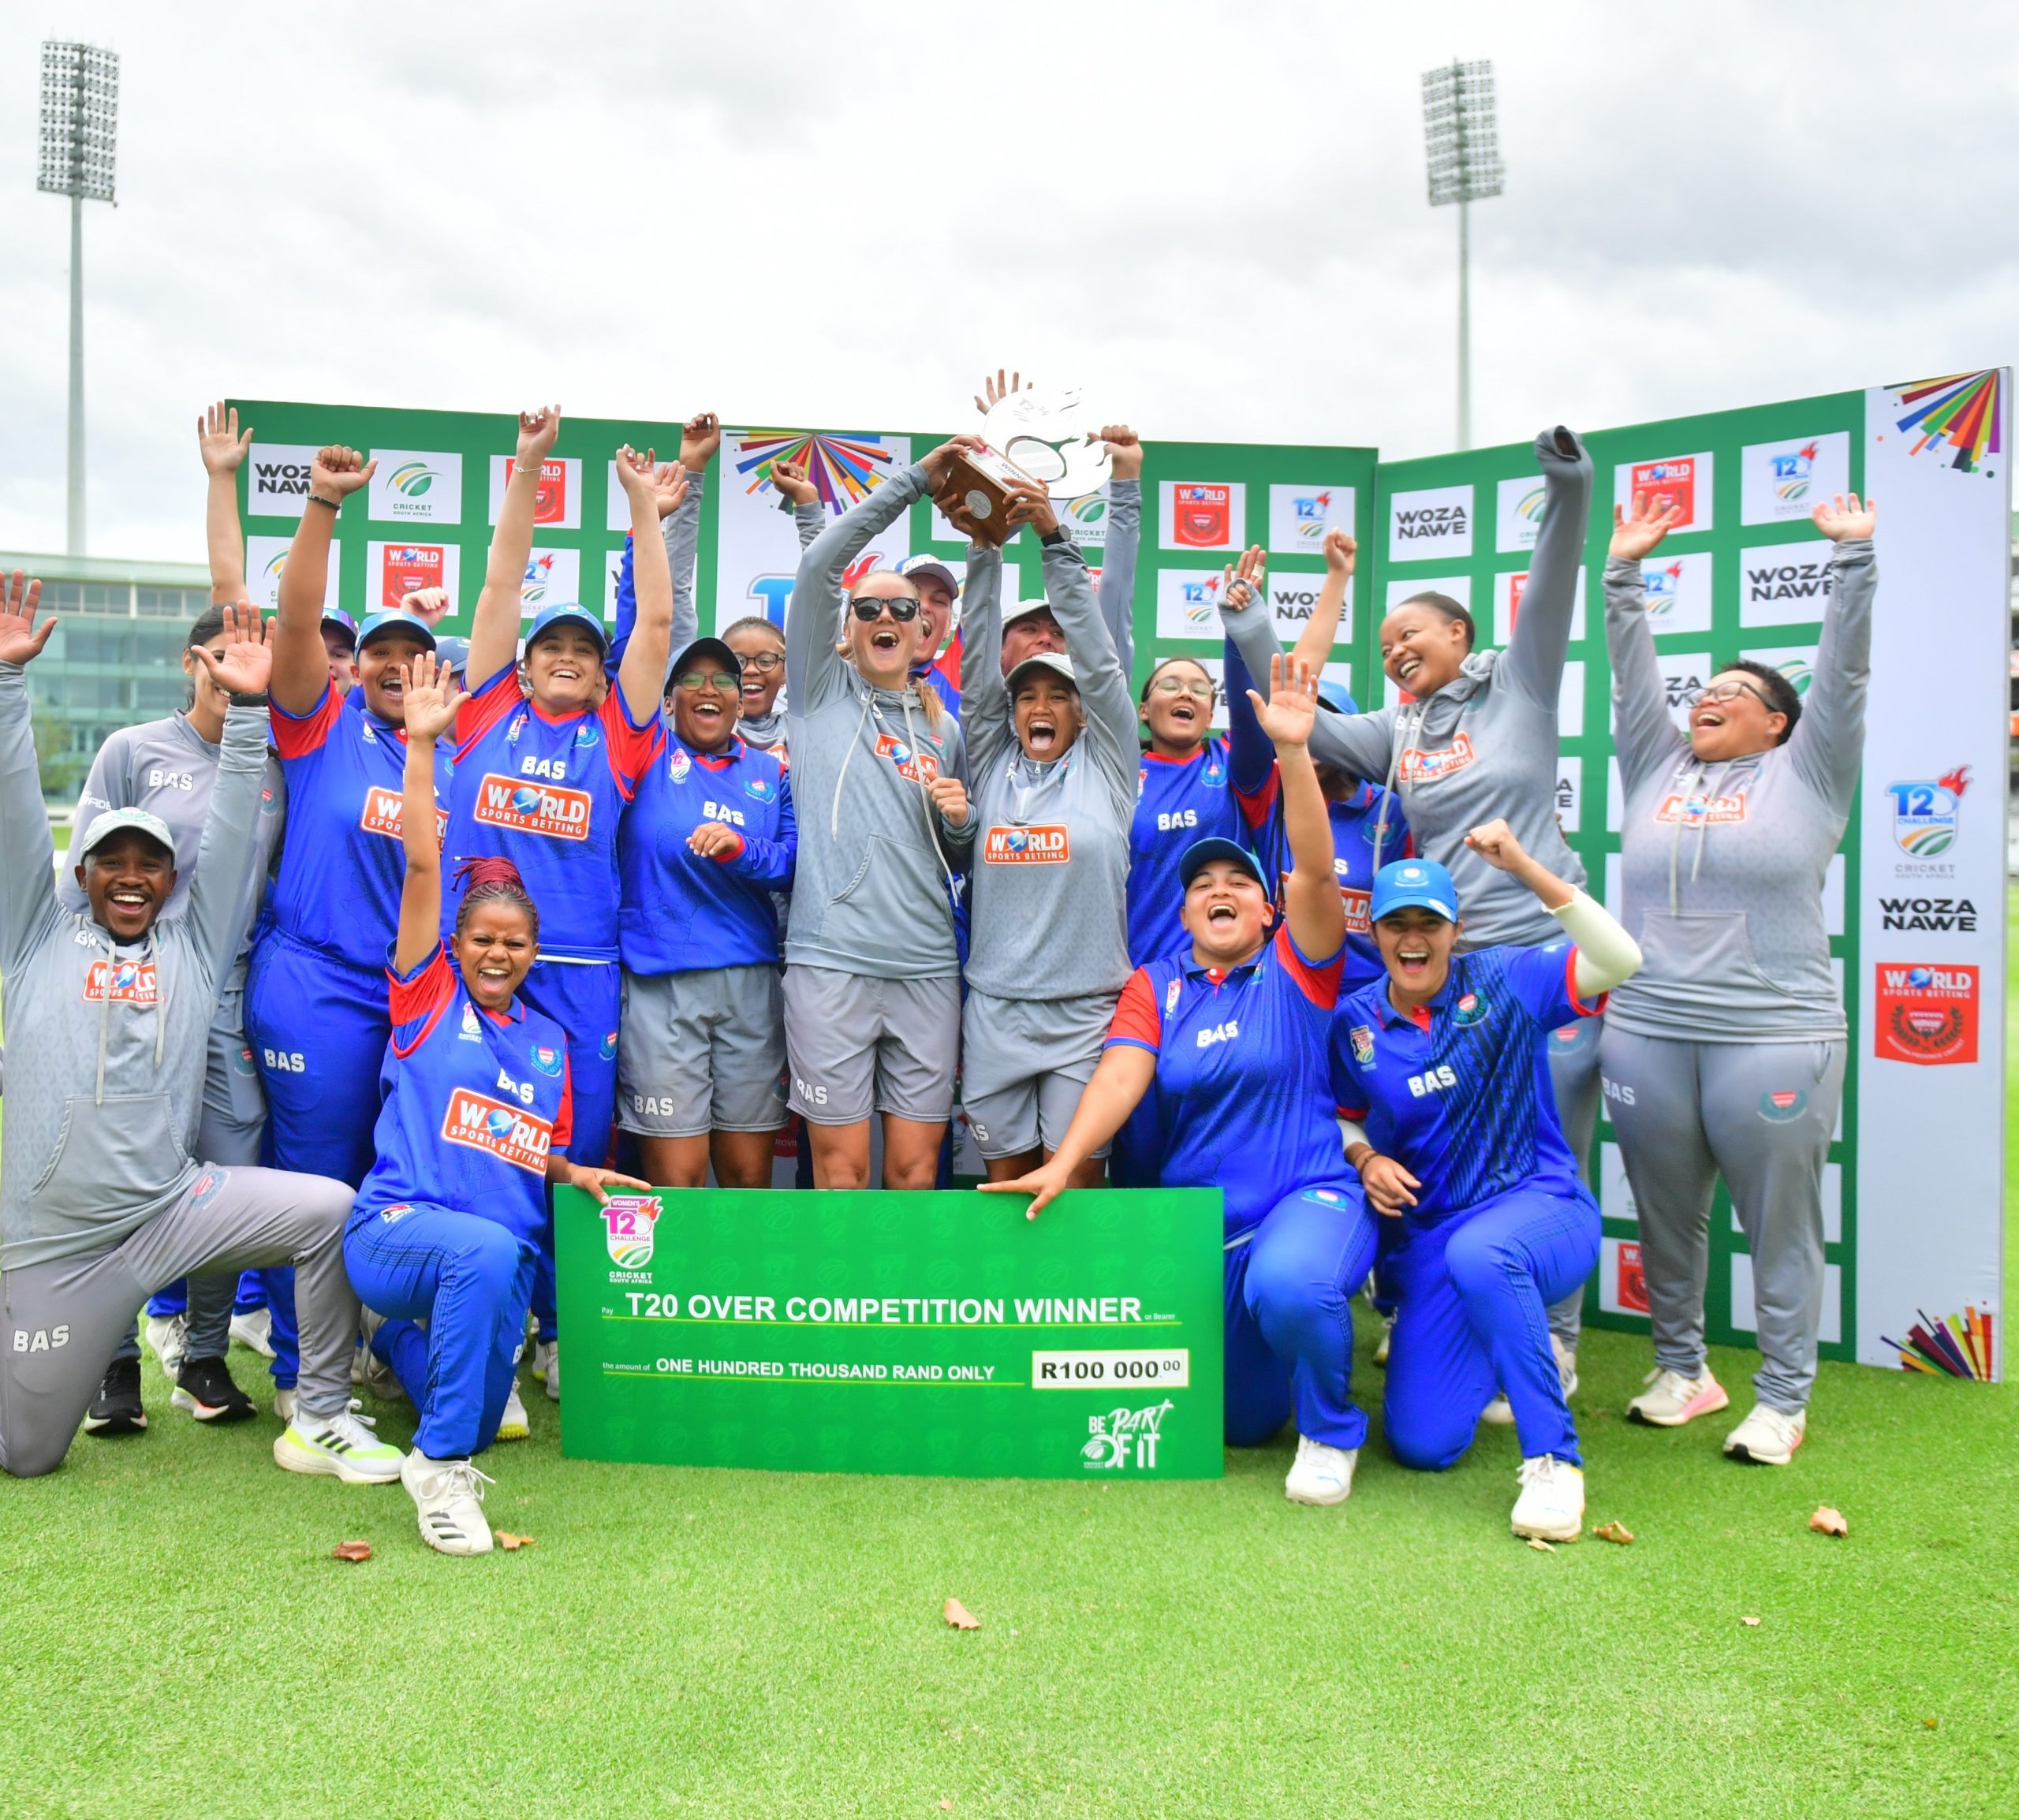 CAPE TOWN, SOUTH AFRICA - APRIL 07: Leah Jones (Club Captain) of World Sports Betting Western Province with teammates celebrates with the trophy during the post match presentation after the CSA Women's T20 Challenge, Division 1 match between World Sports Betti